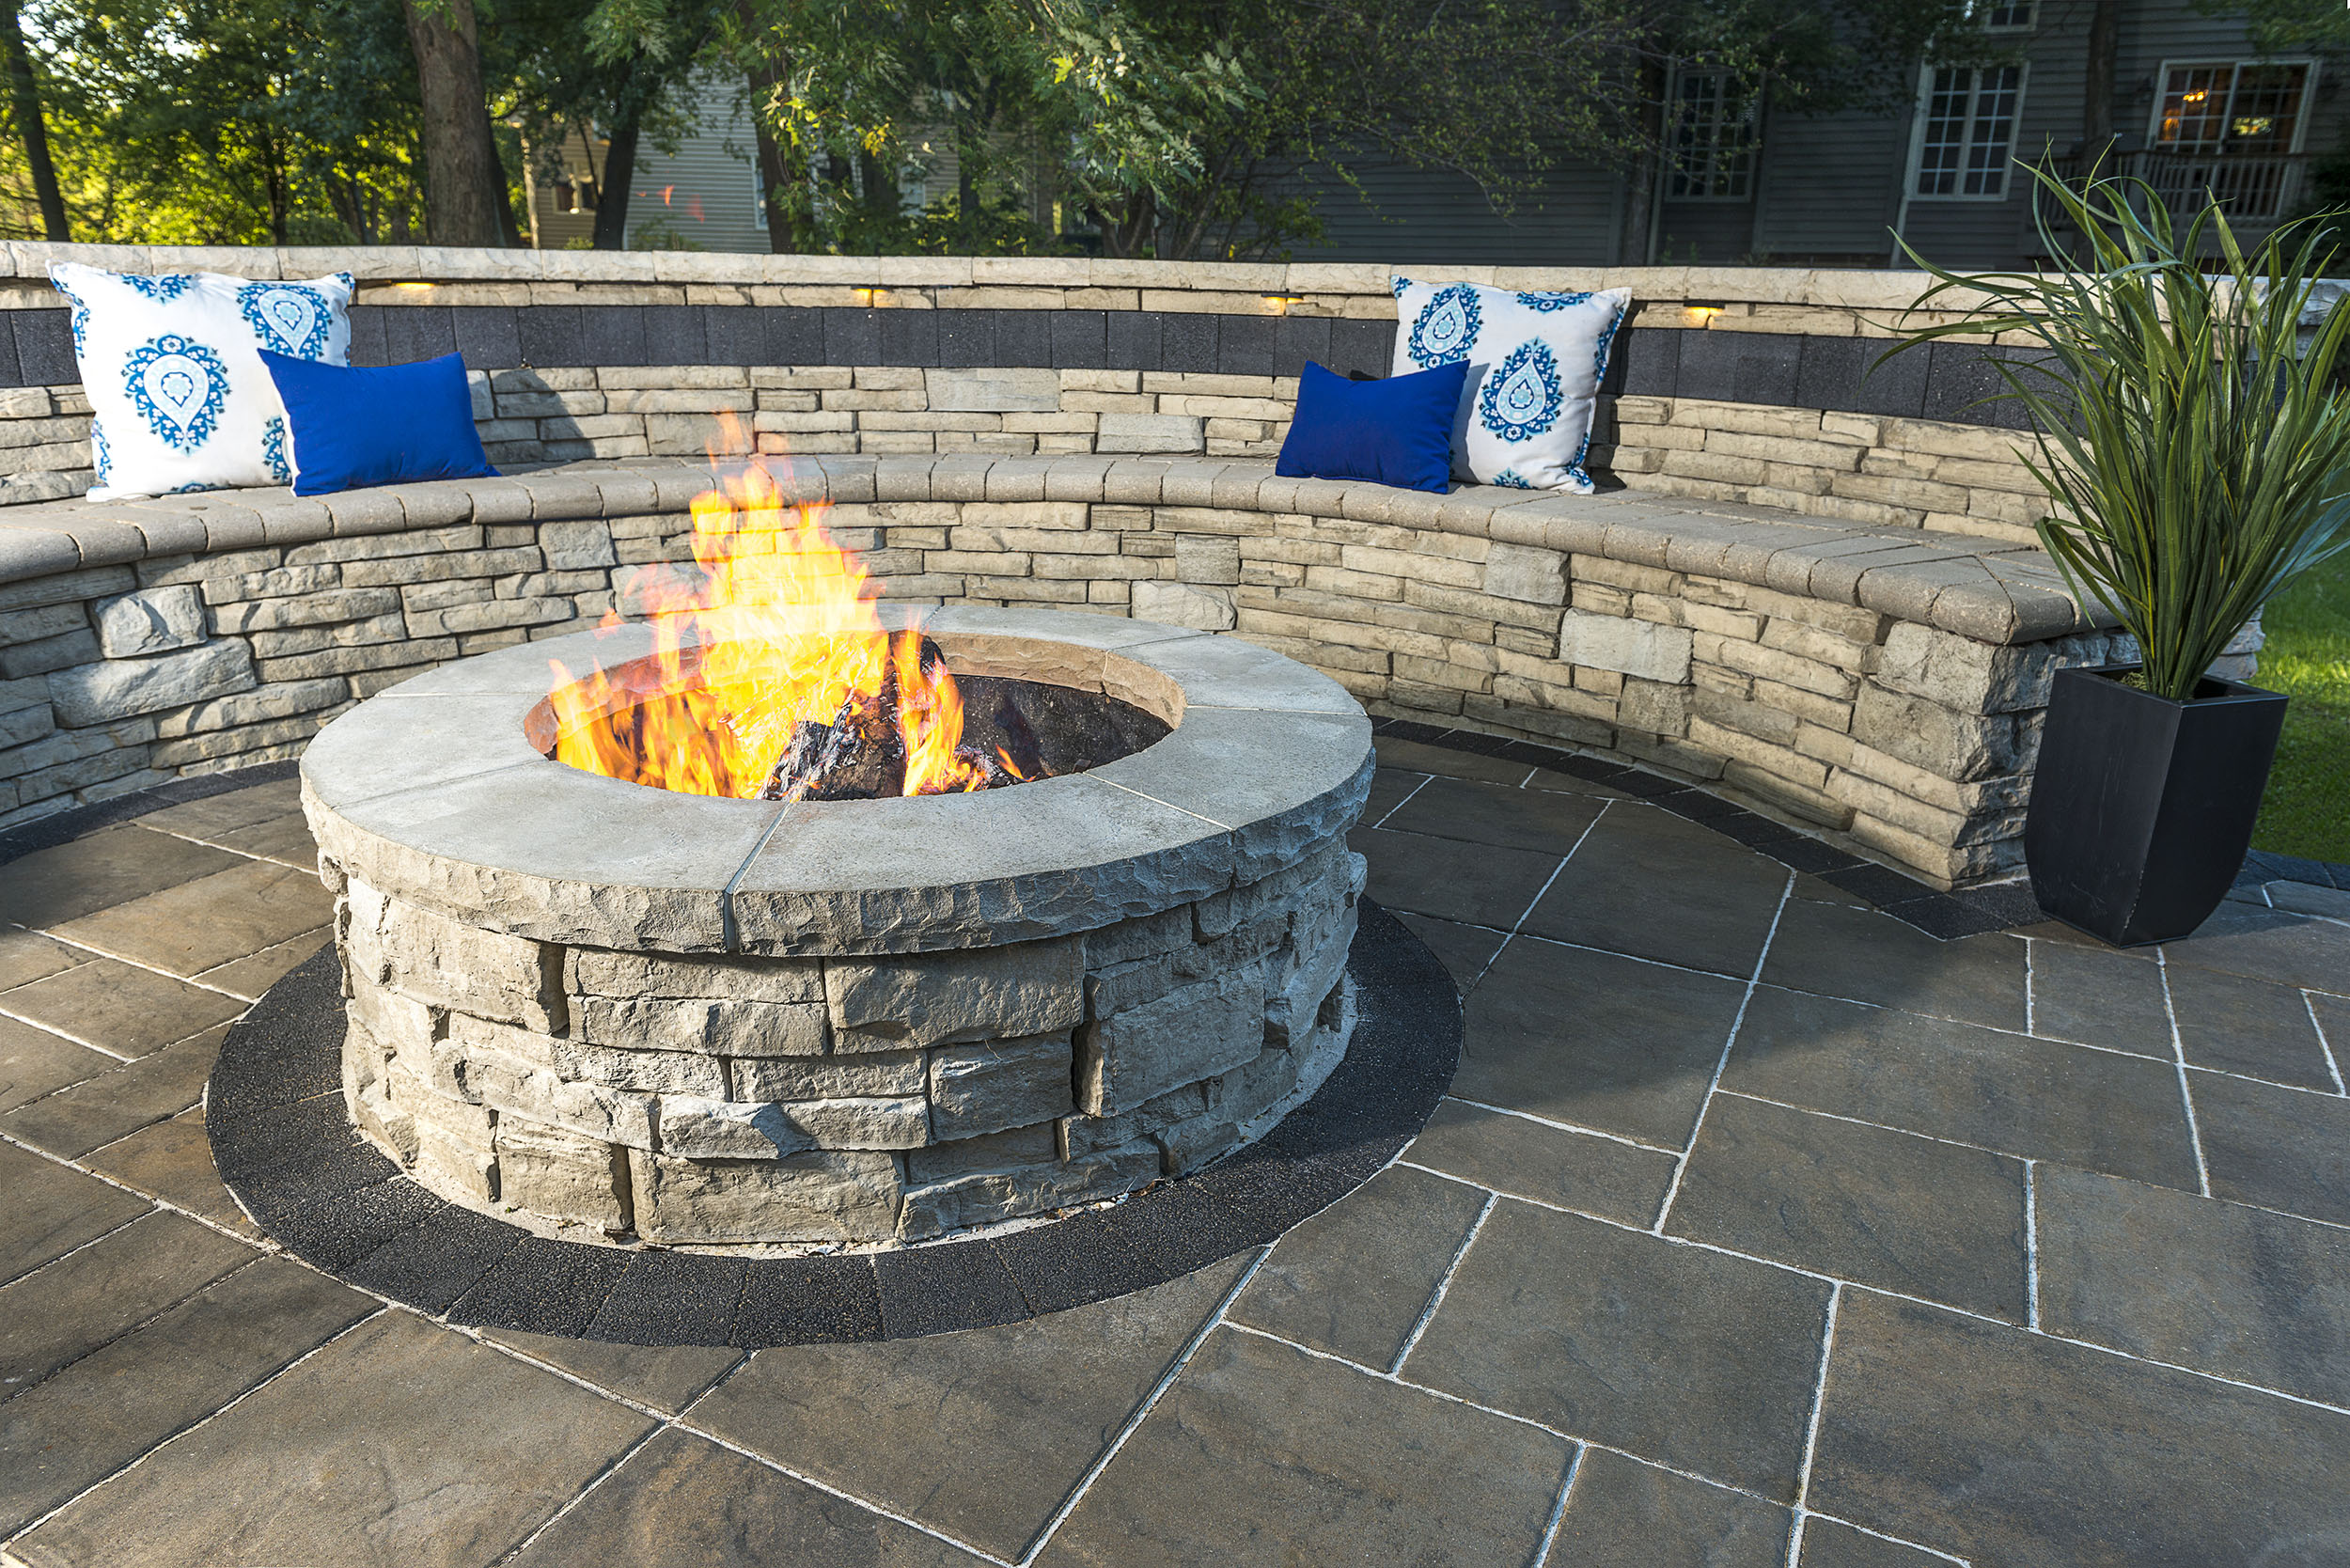 Fireplace Lancaster, Harrisburg, PA - Fire Pit York, State College, PA